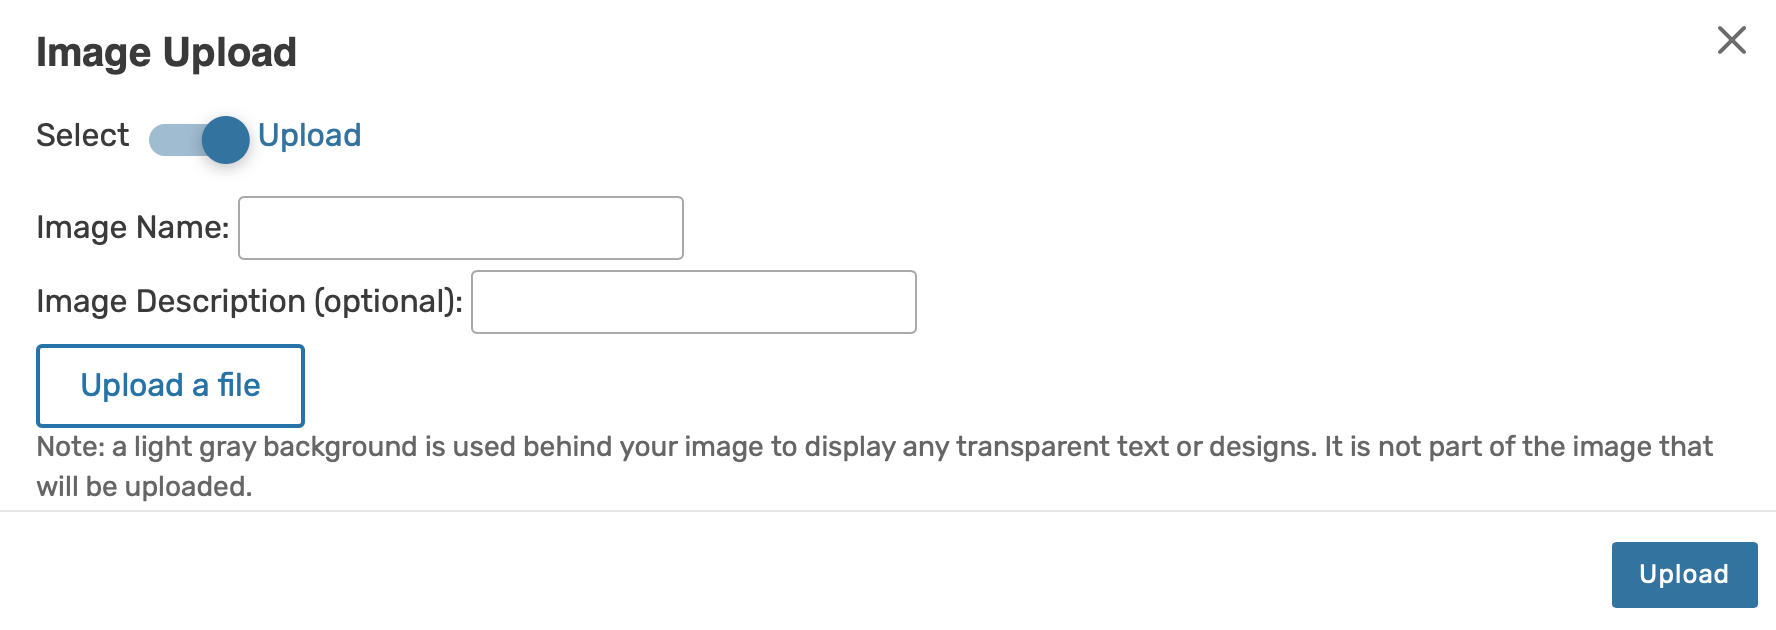 Toggle between selecting or uploading an image